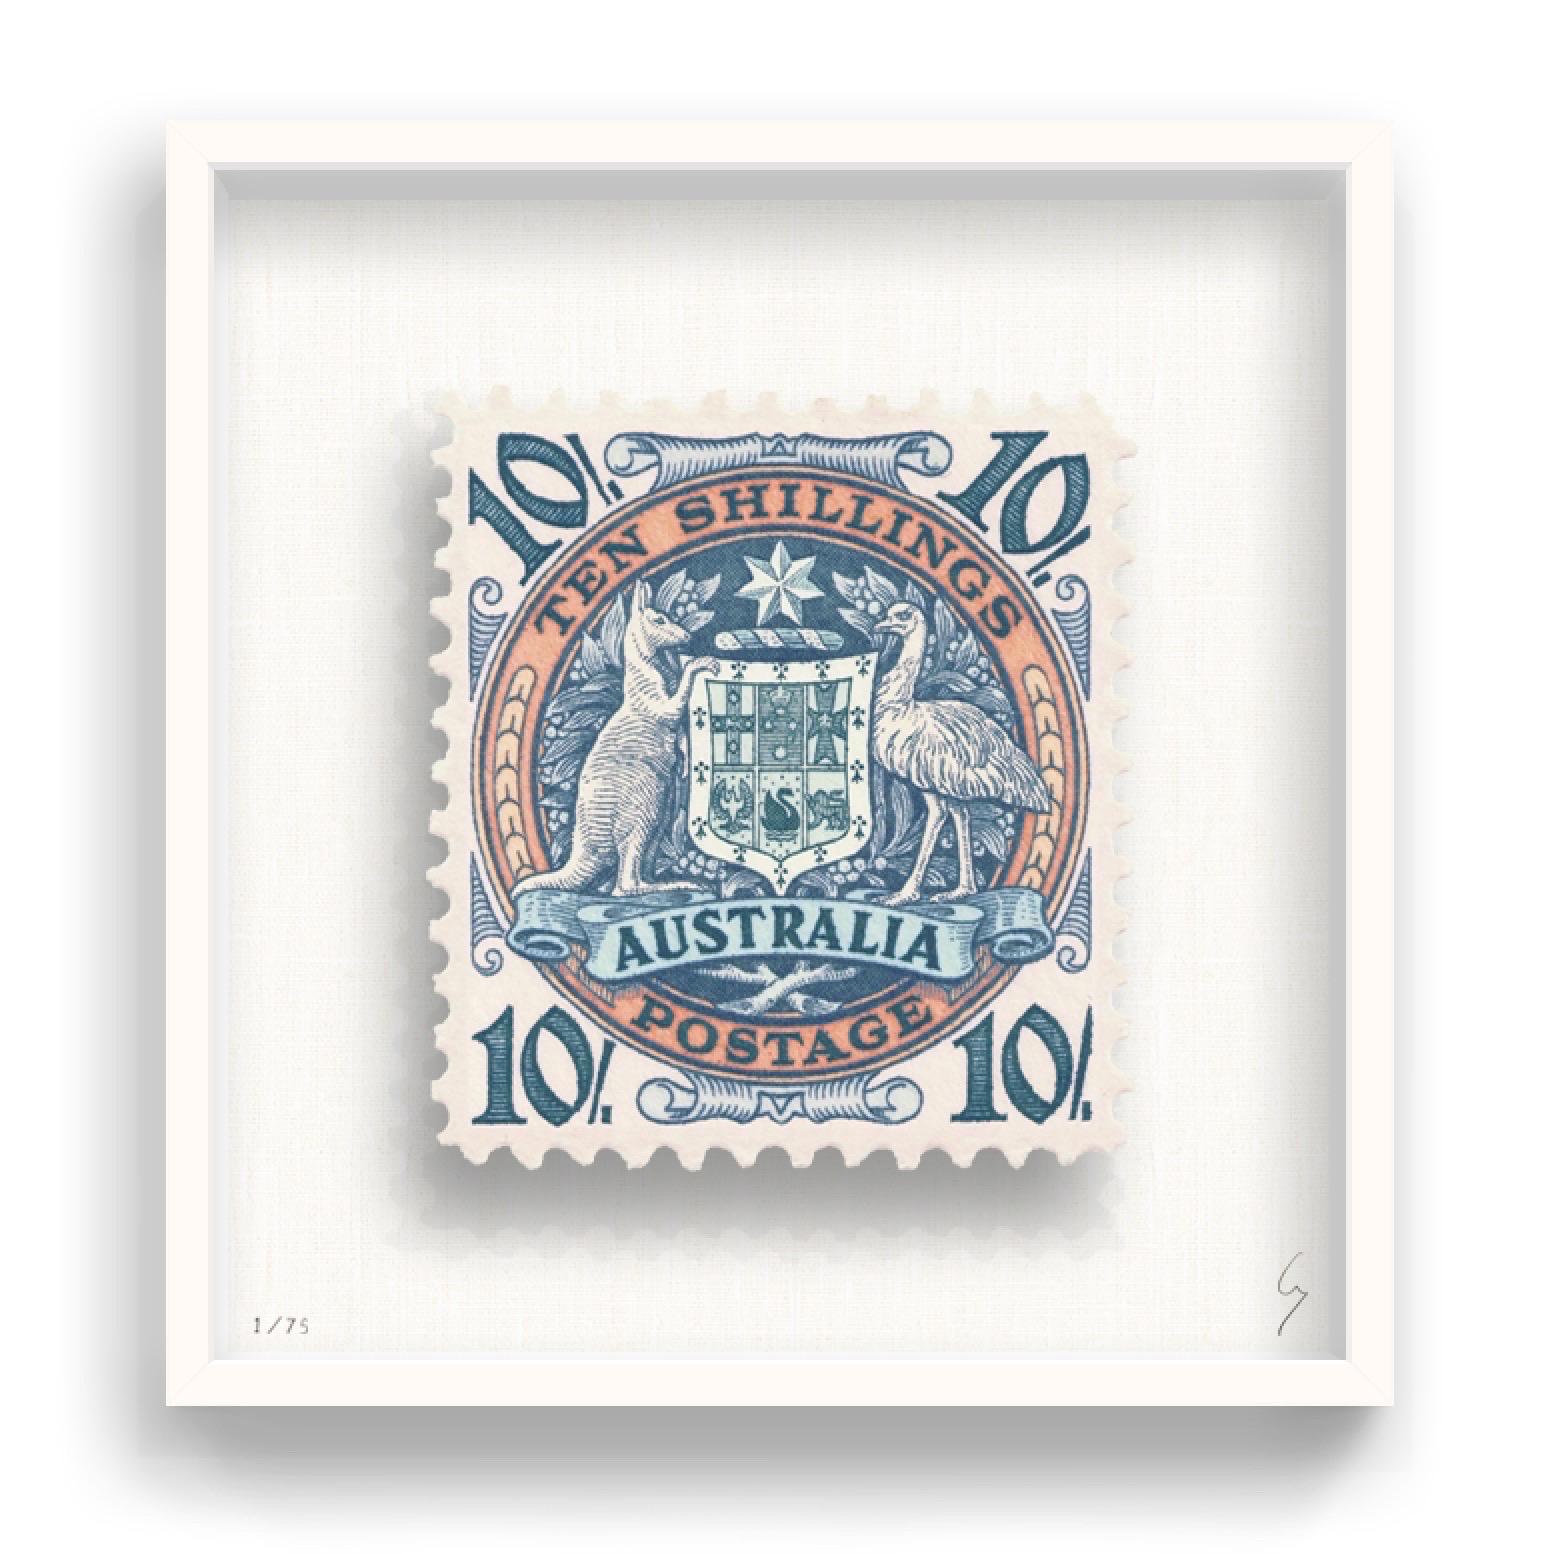 Guy Gee, Australia (medium)

Hand-engraved print on 350gsm on G.F Smith card
53 x 56cm (20 4/5 x 22 2/5 in)
Frame included 
Edition of 75 

Each artwork by Guy had been digitally reimagined from an original postage stamp. Cut out and finished by